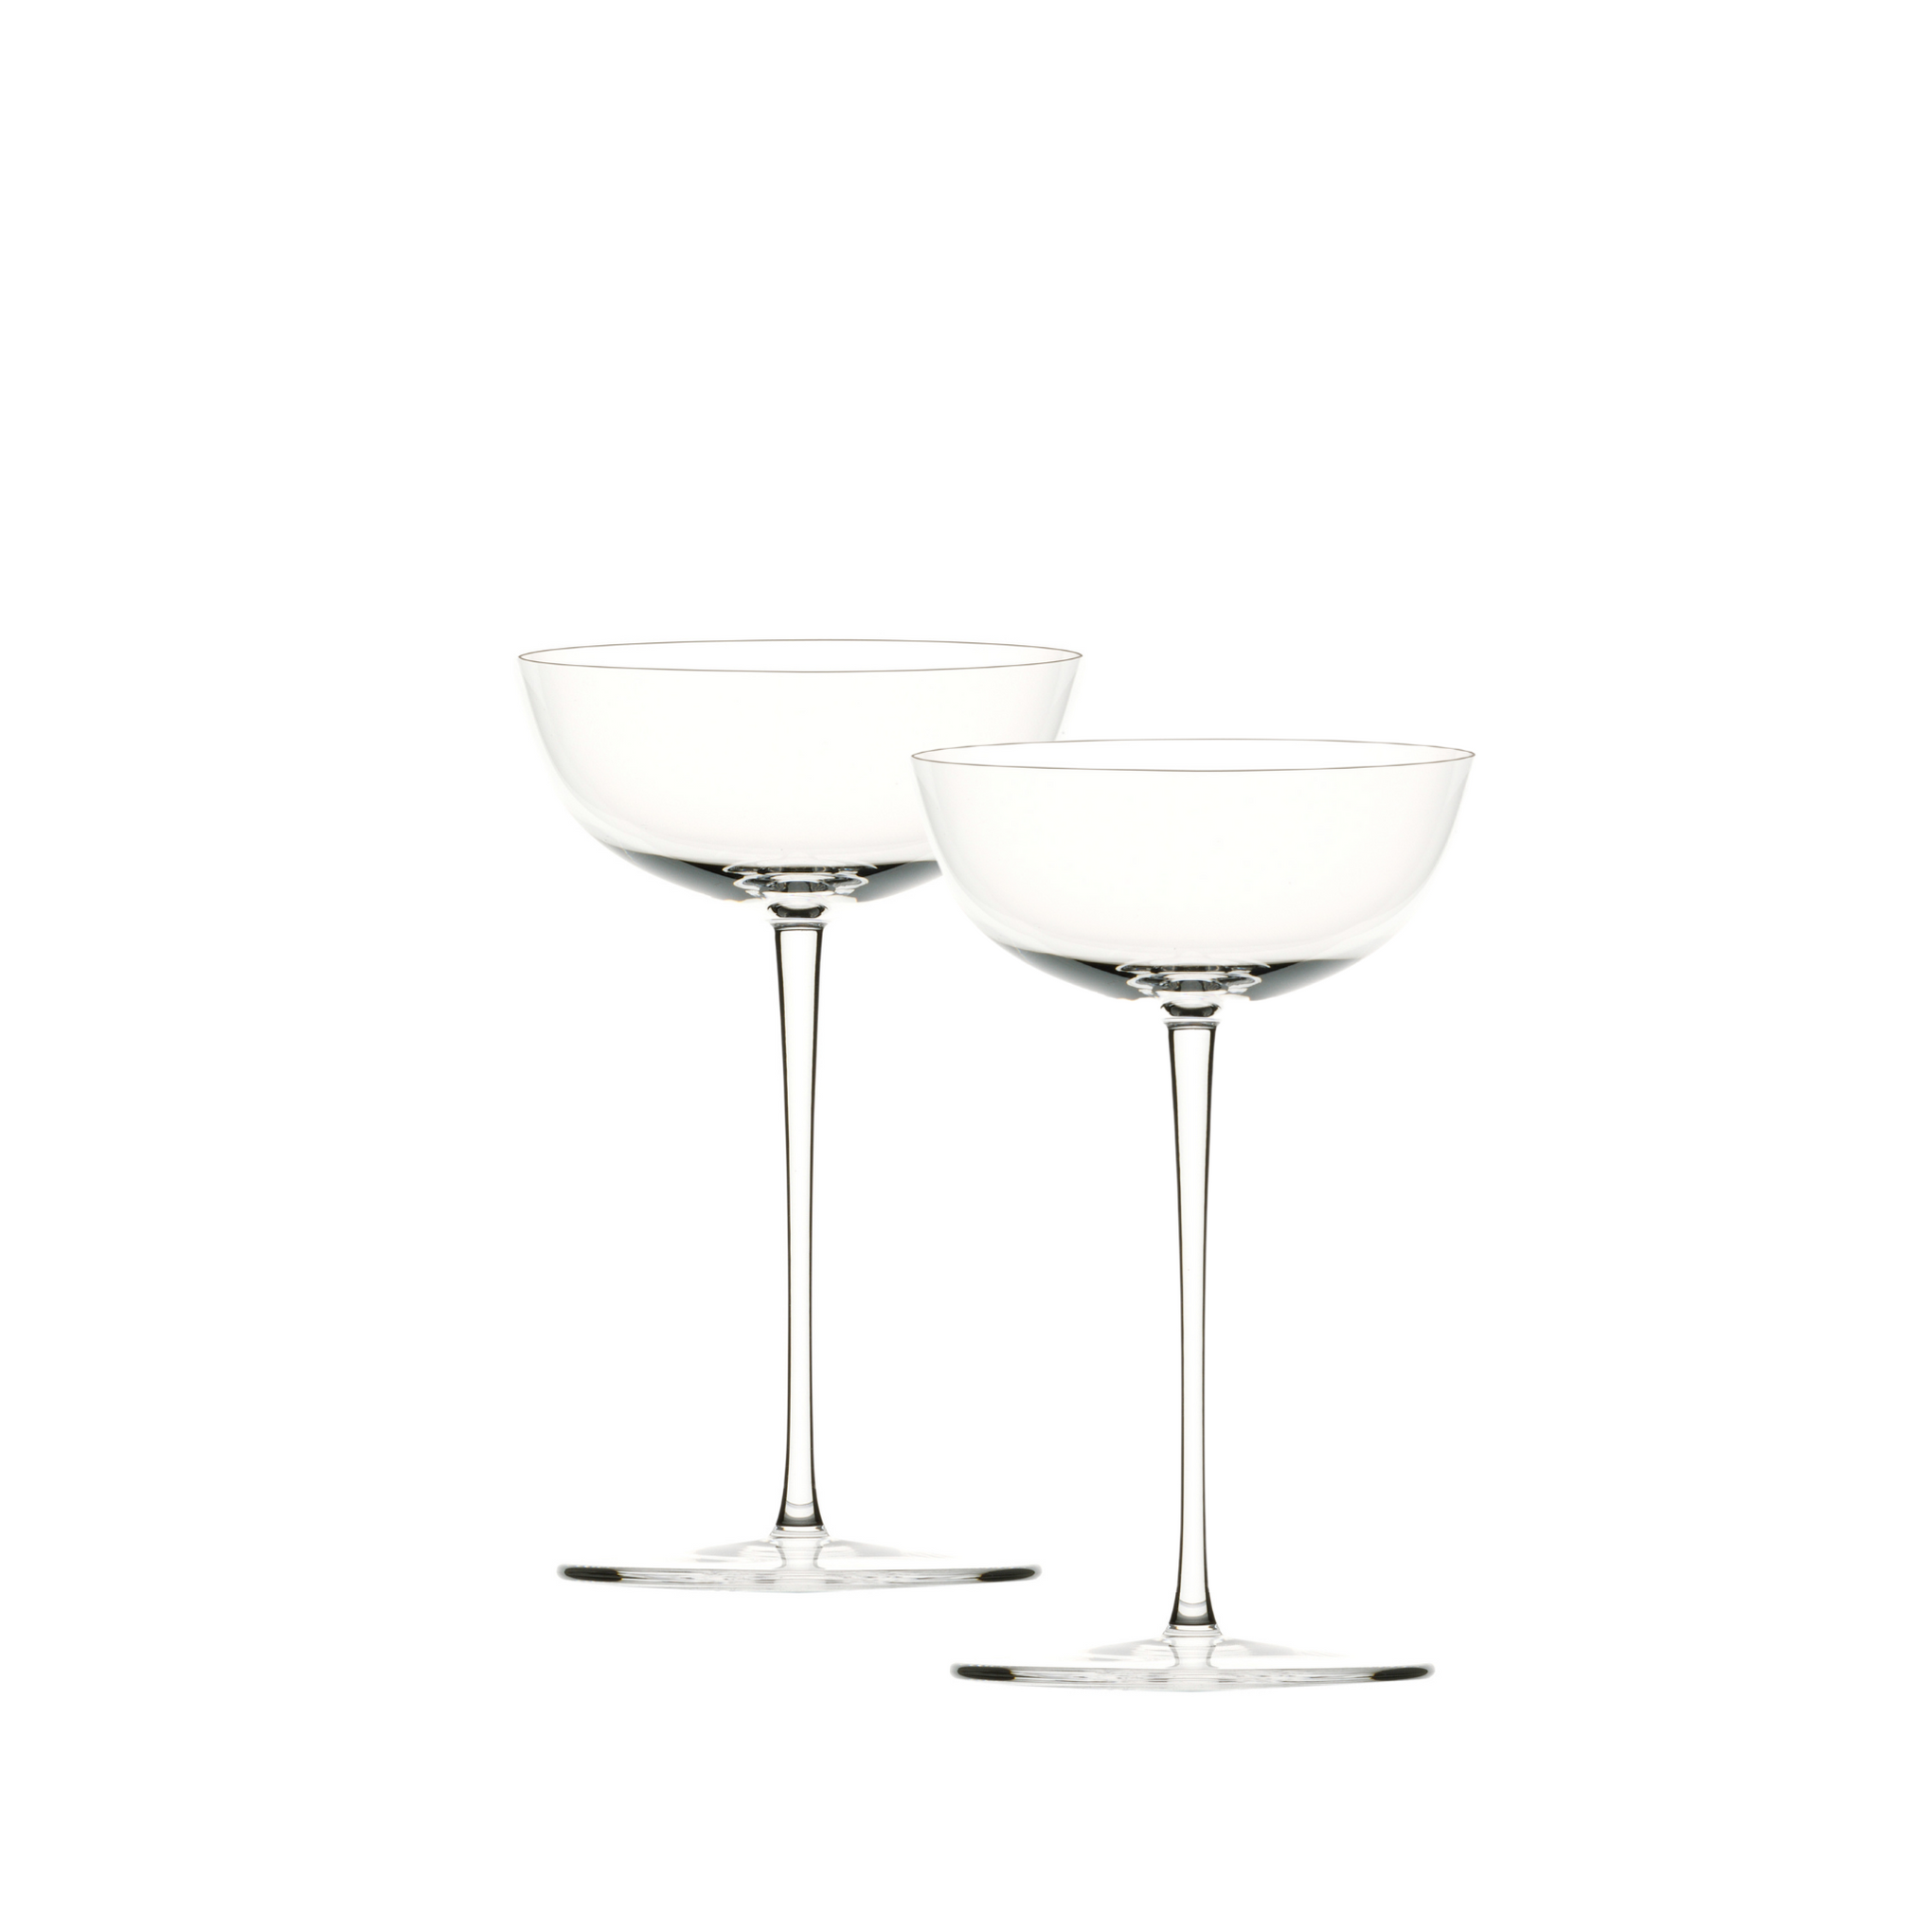 JOSEF HOFFMAN PATRICIAN CRYSTAL CHAMPAGNE COUPE